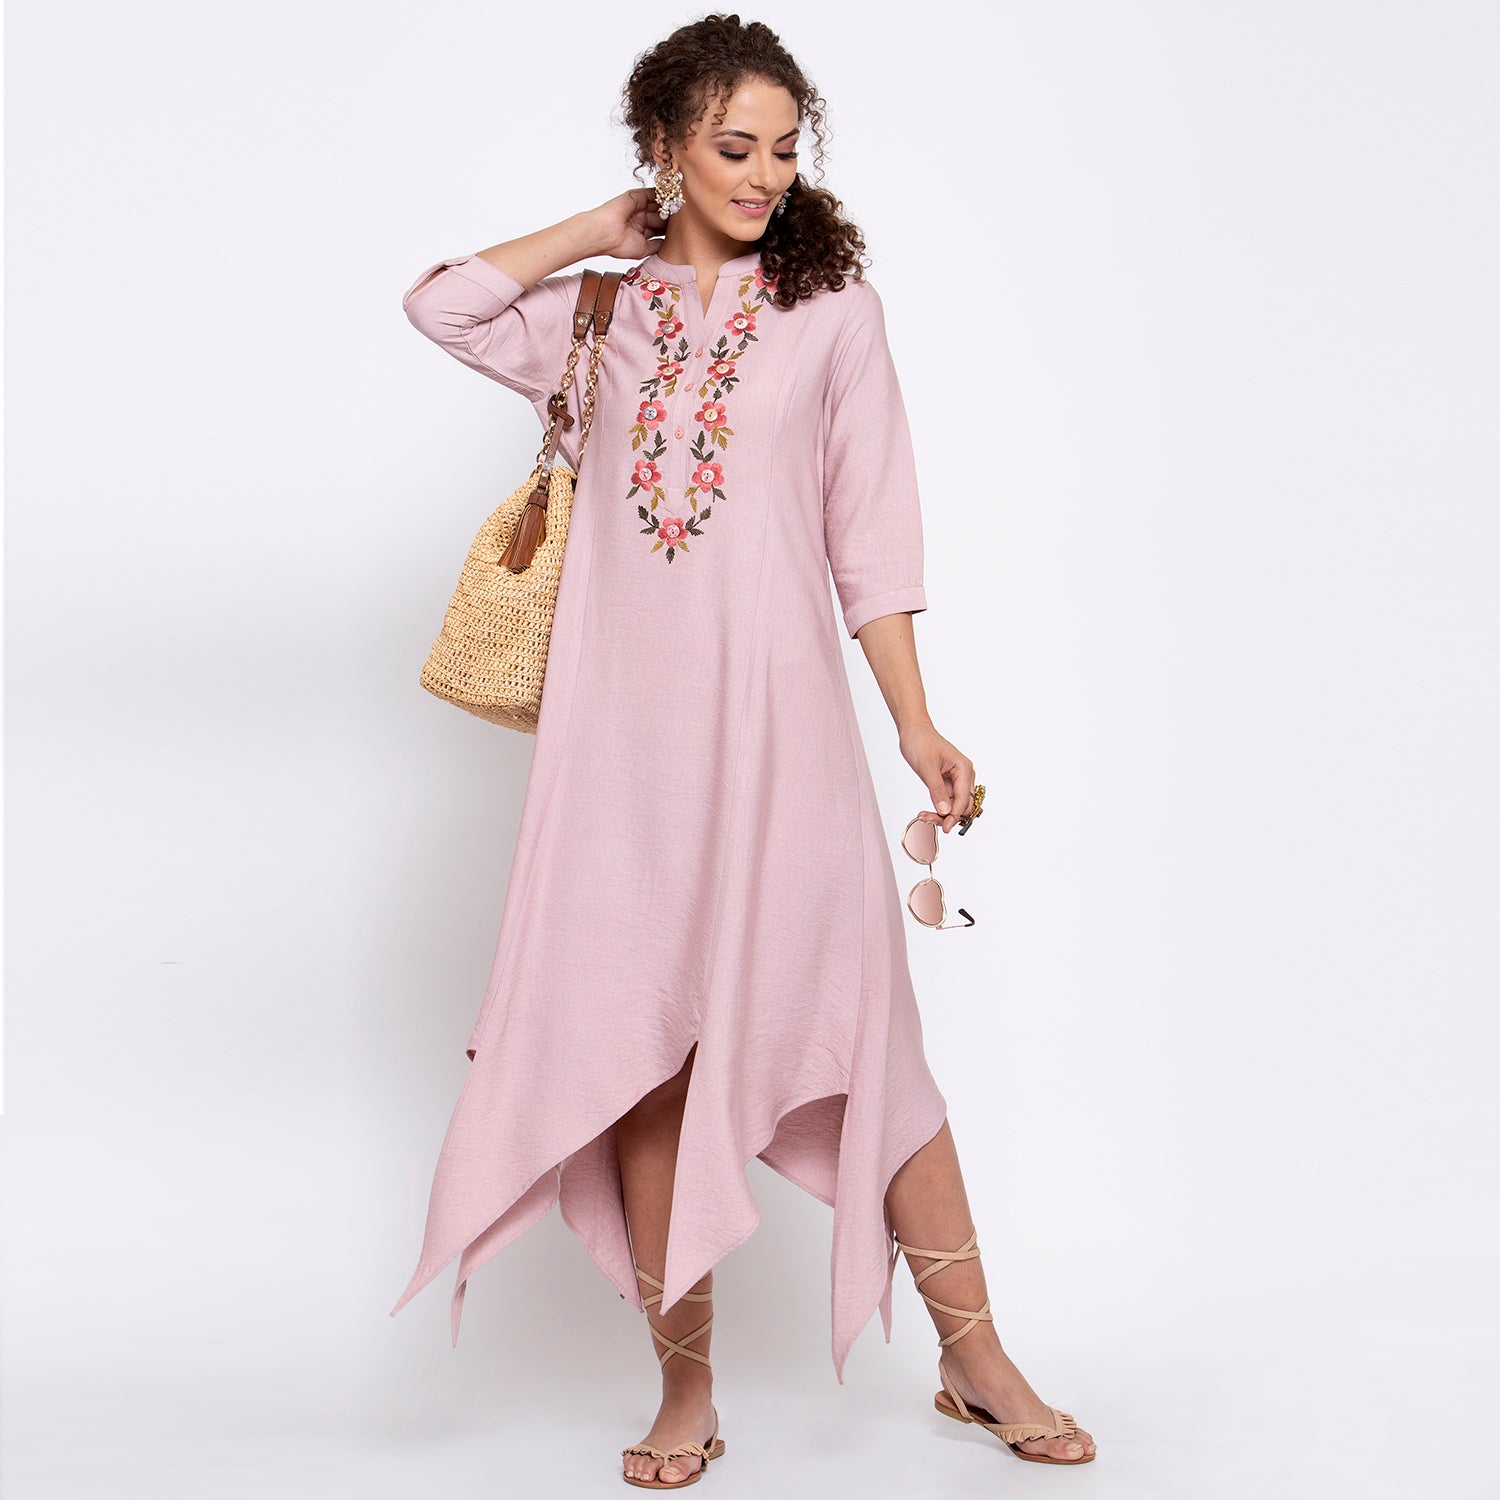 Pink Linen Triangle Dress With Buttons Embroidery